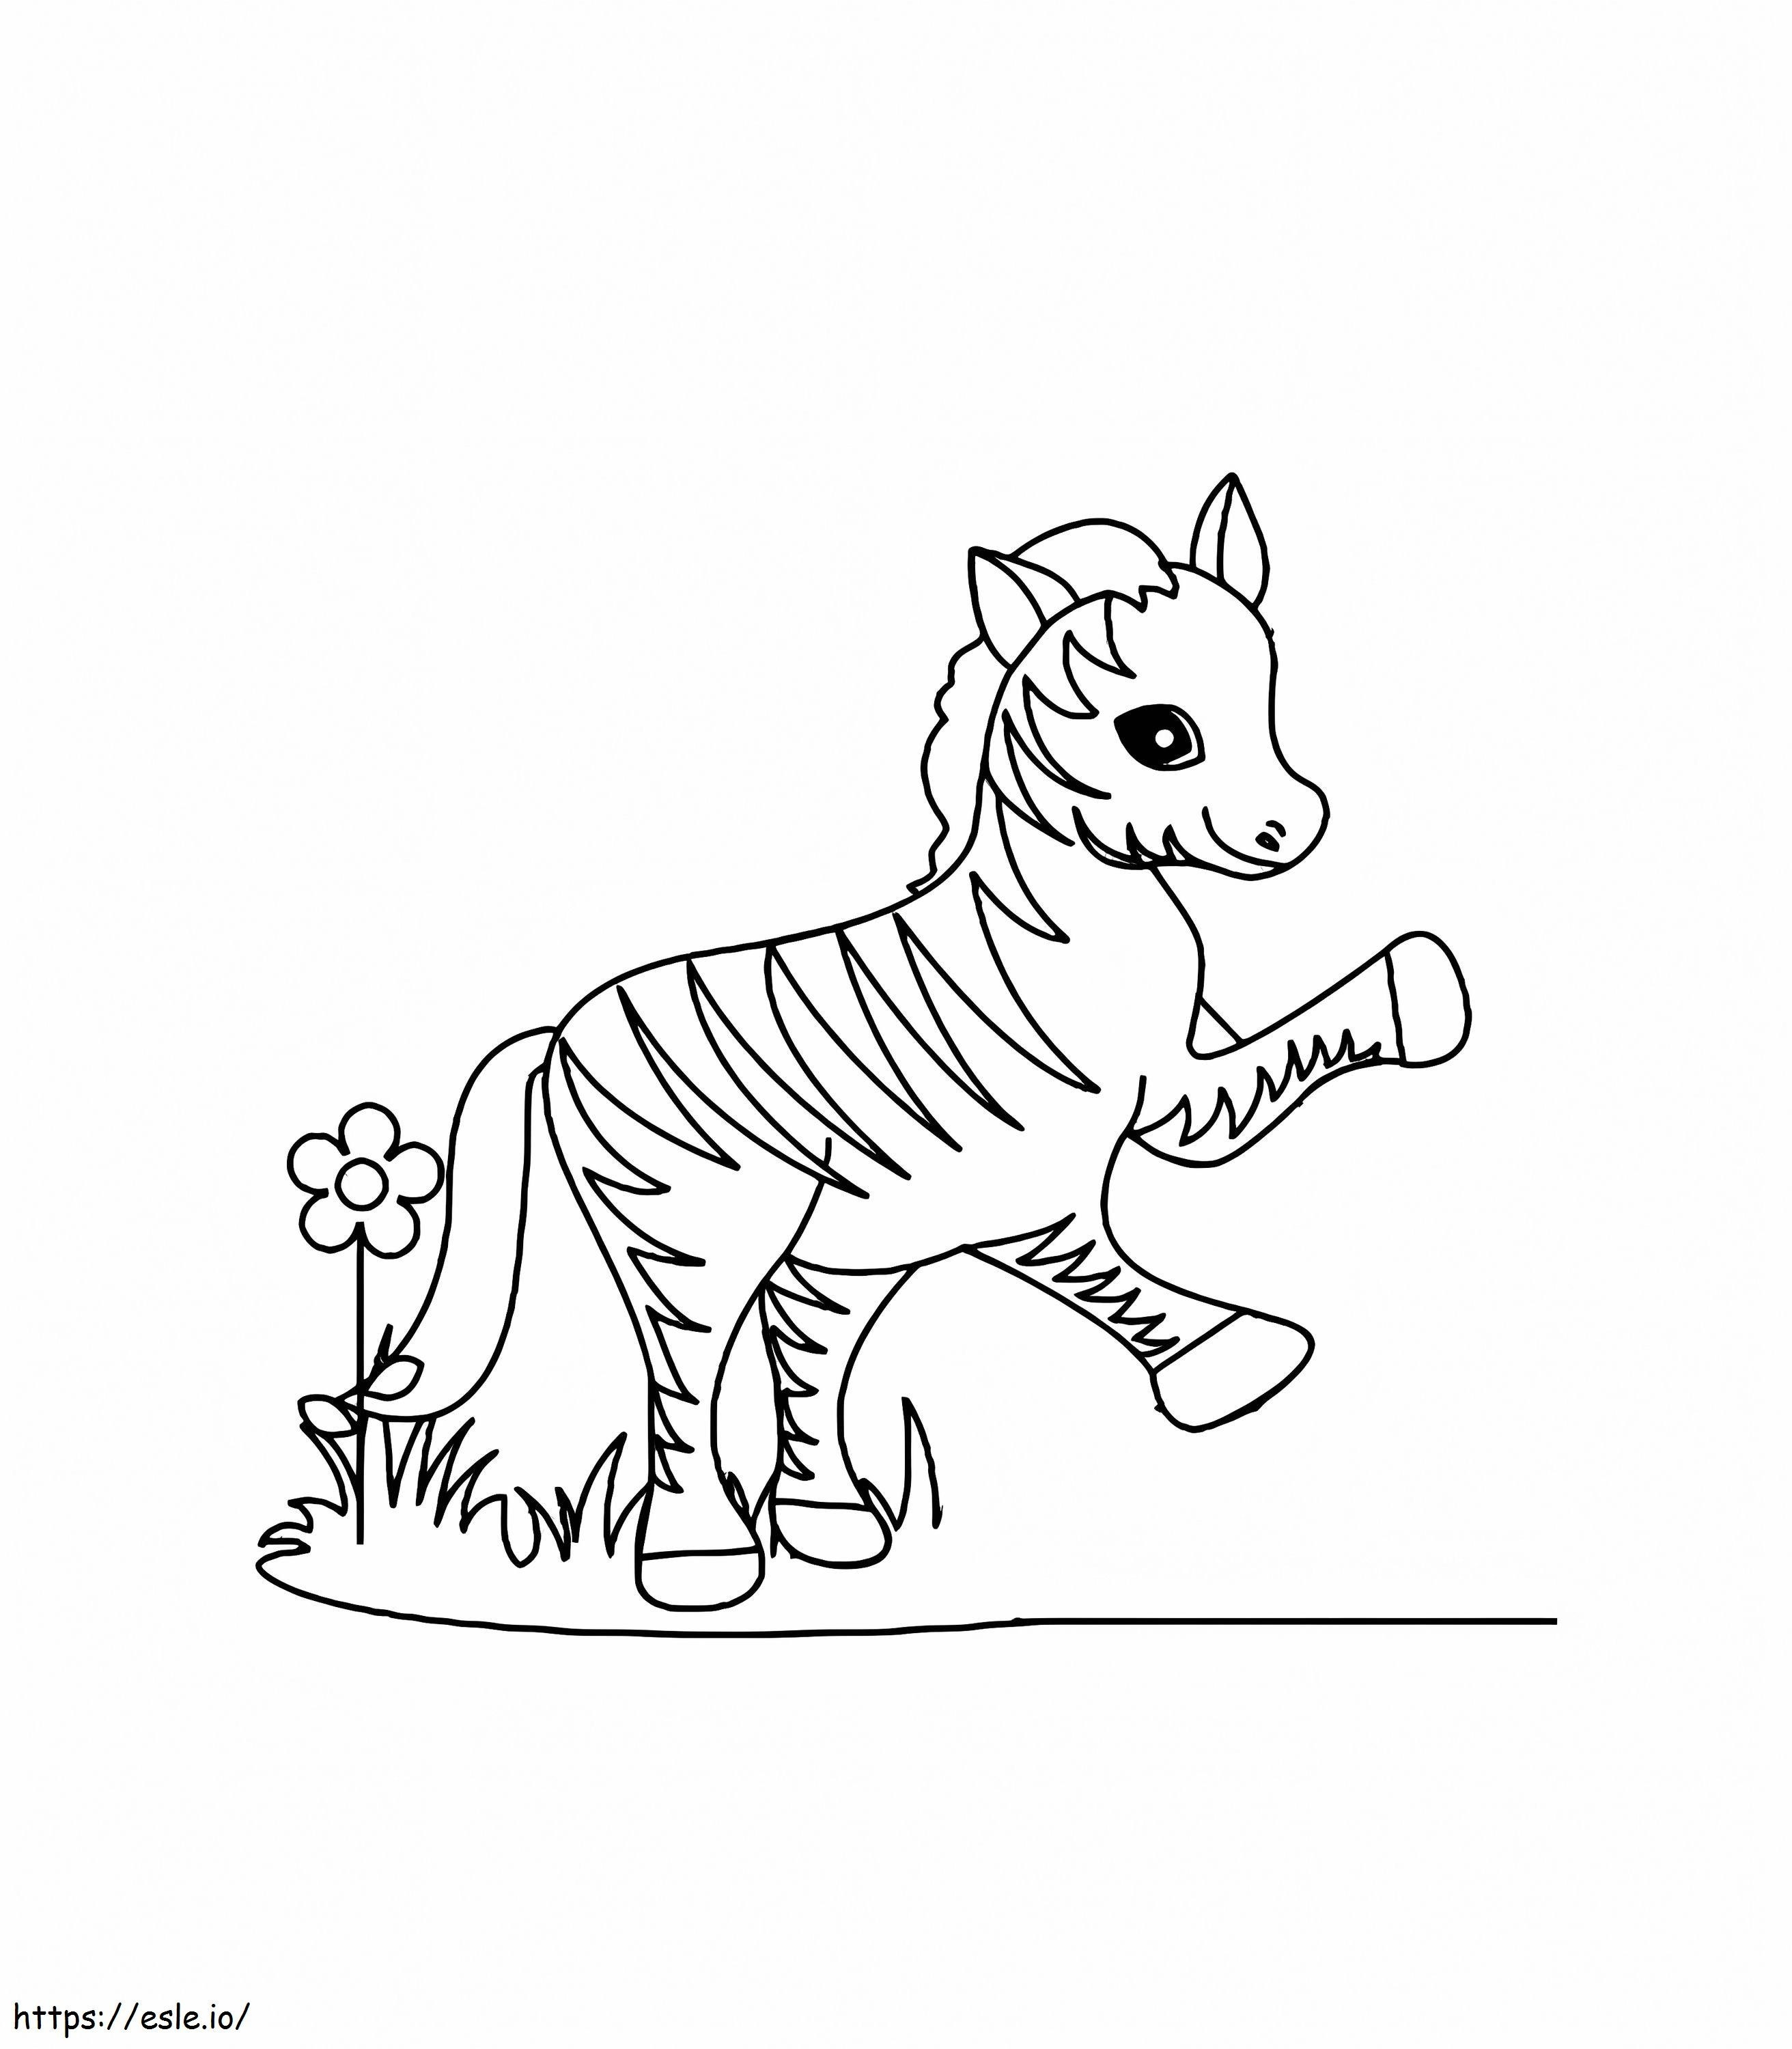 Zebra With Flower And Grass coloring page